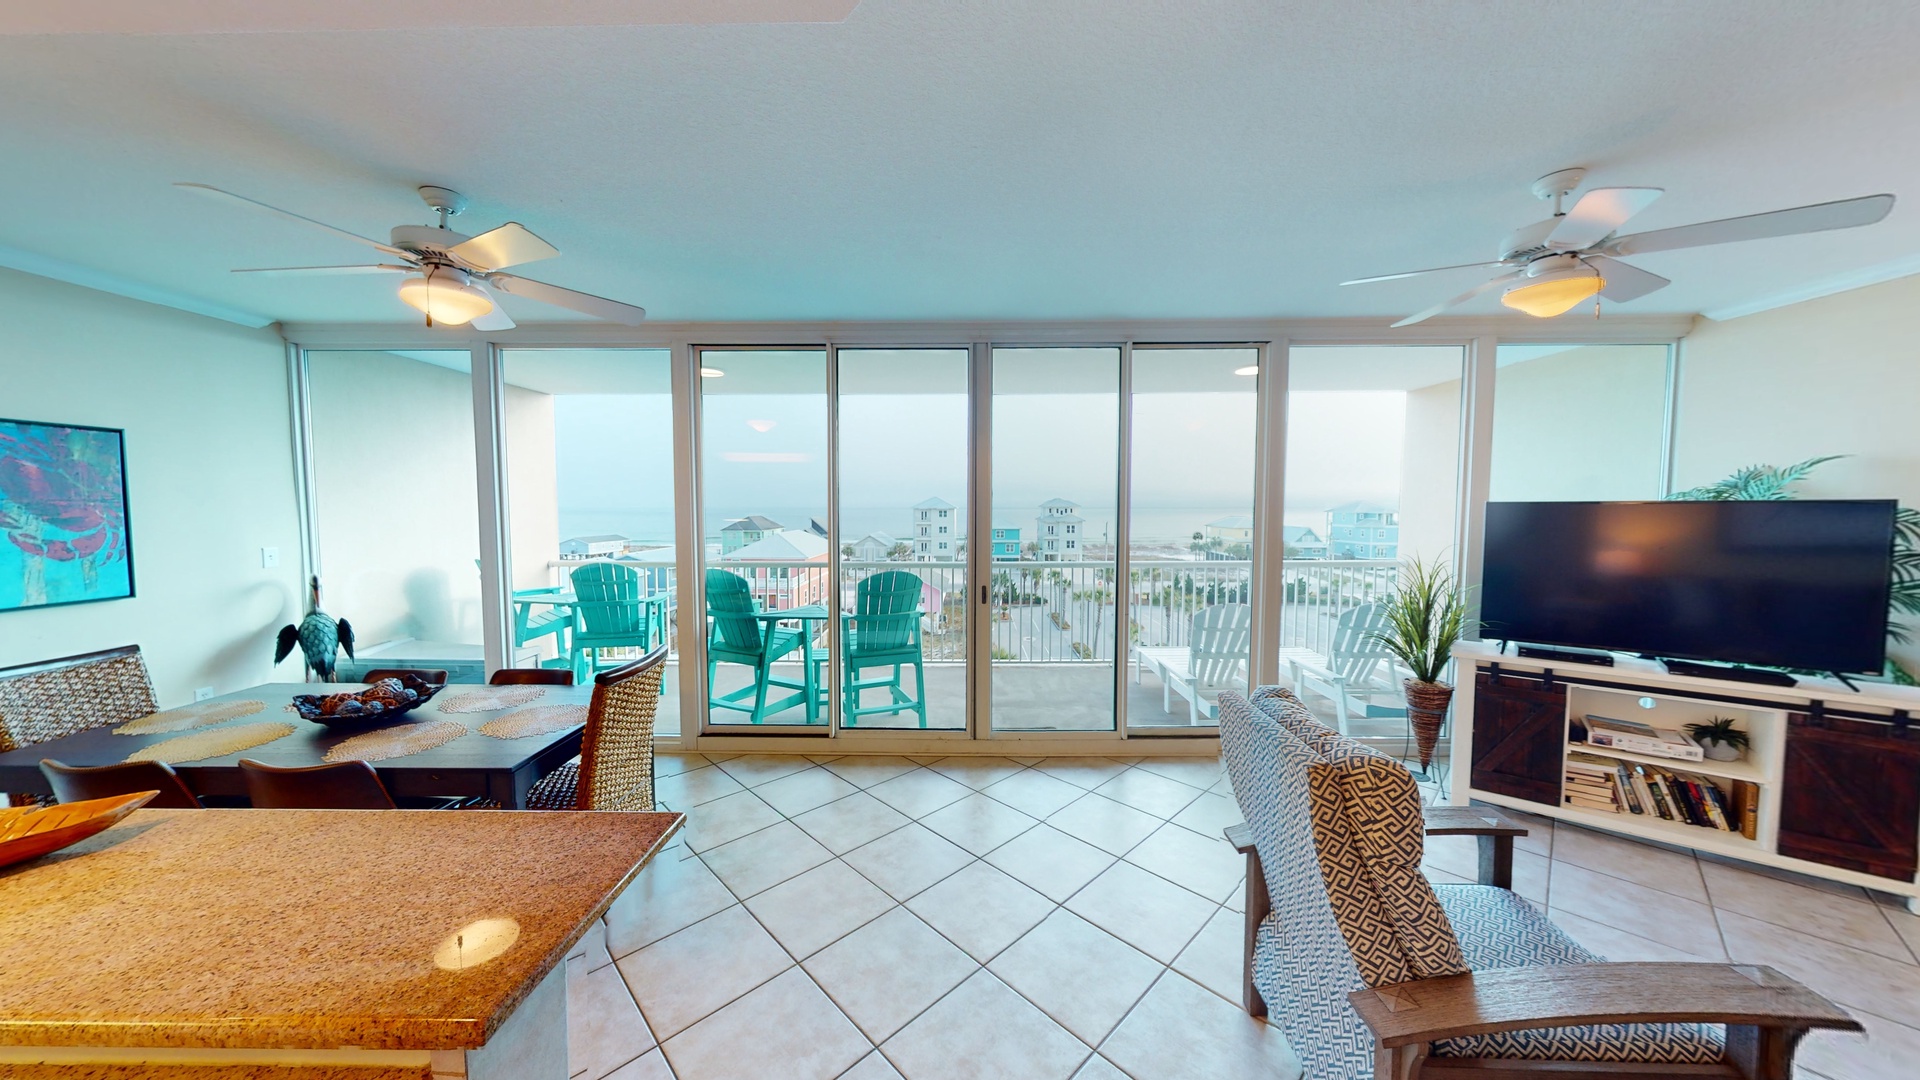 Fantastic views in the open living area with balcony access